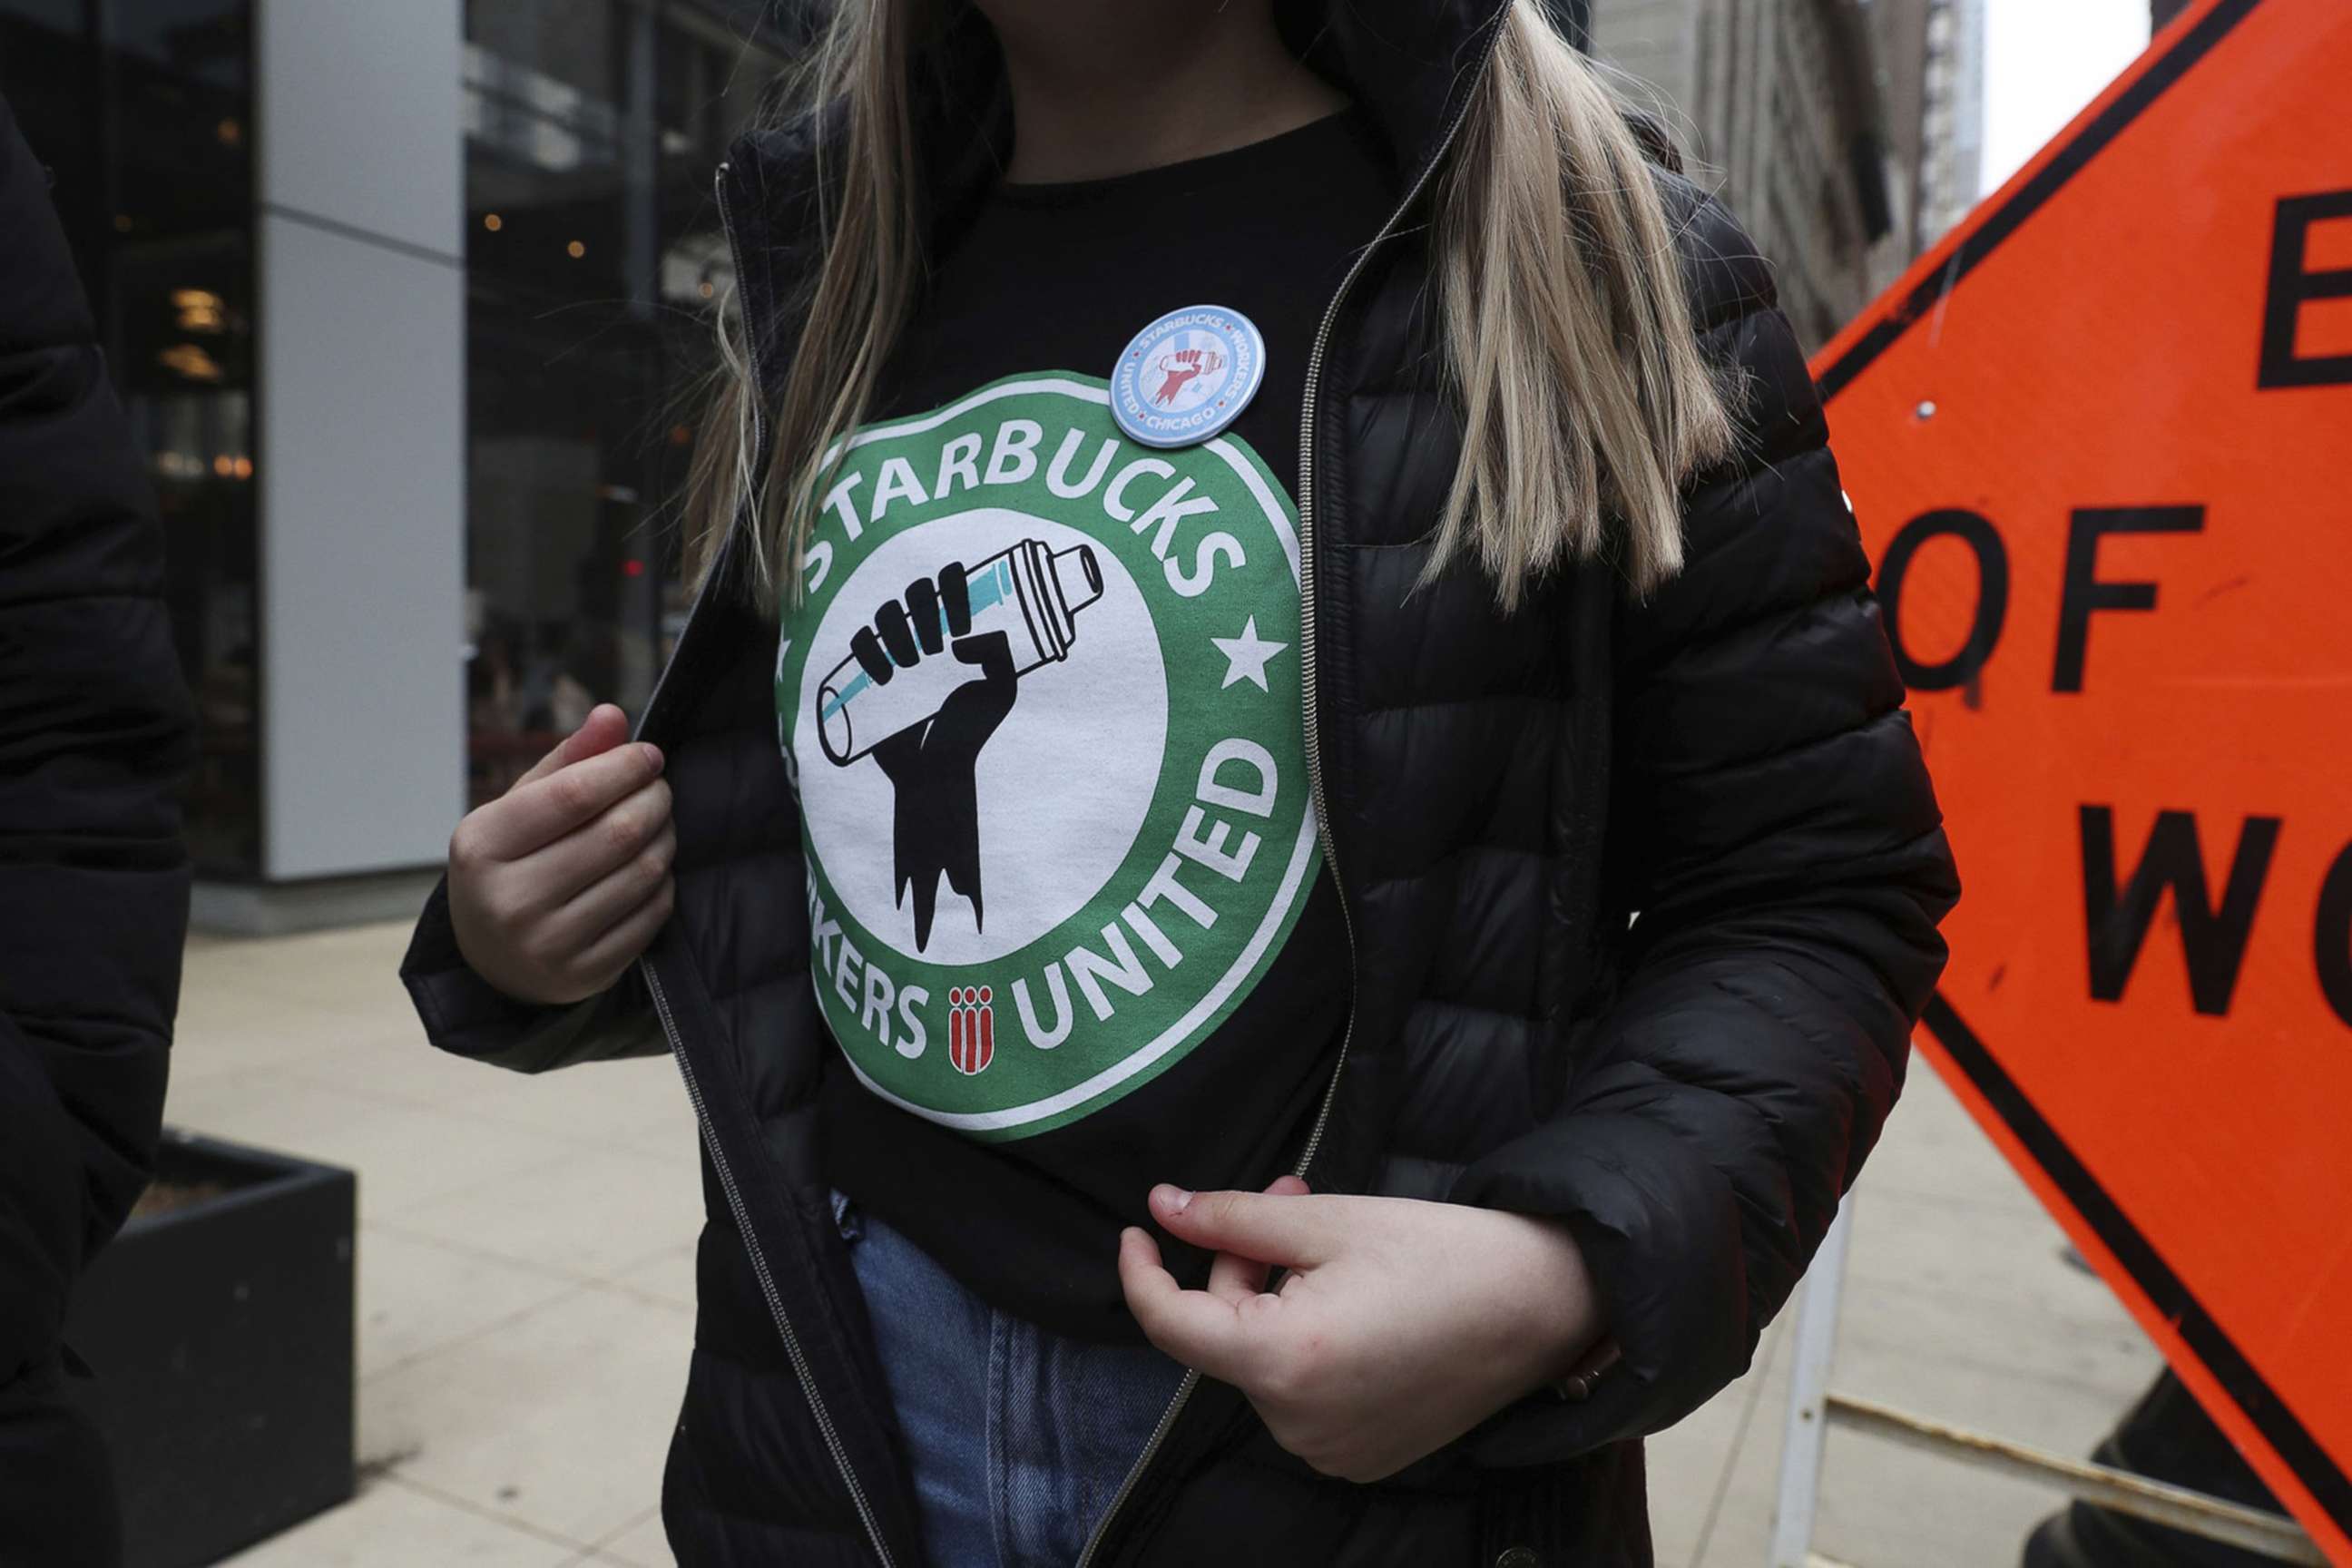 PHOTO: Starbucks worker Kaylie McKinley wears a t-shirt and button promoting unionization, outside a Chicago location, April 7, 2022.